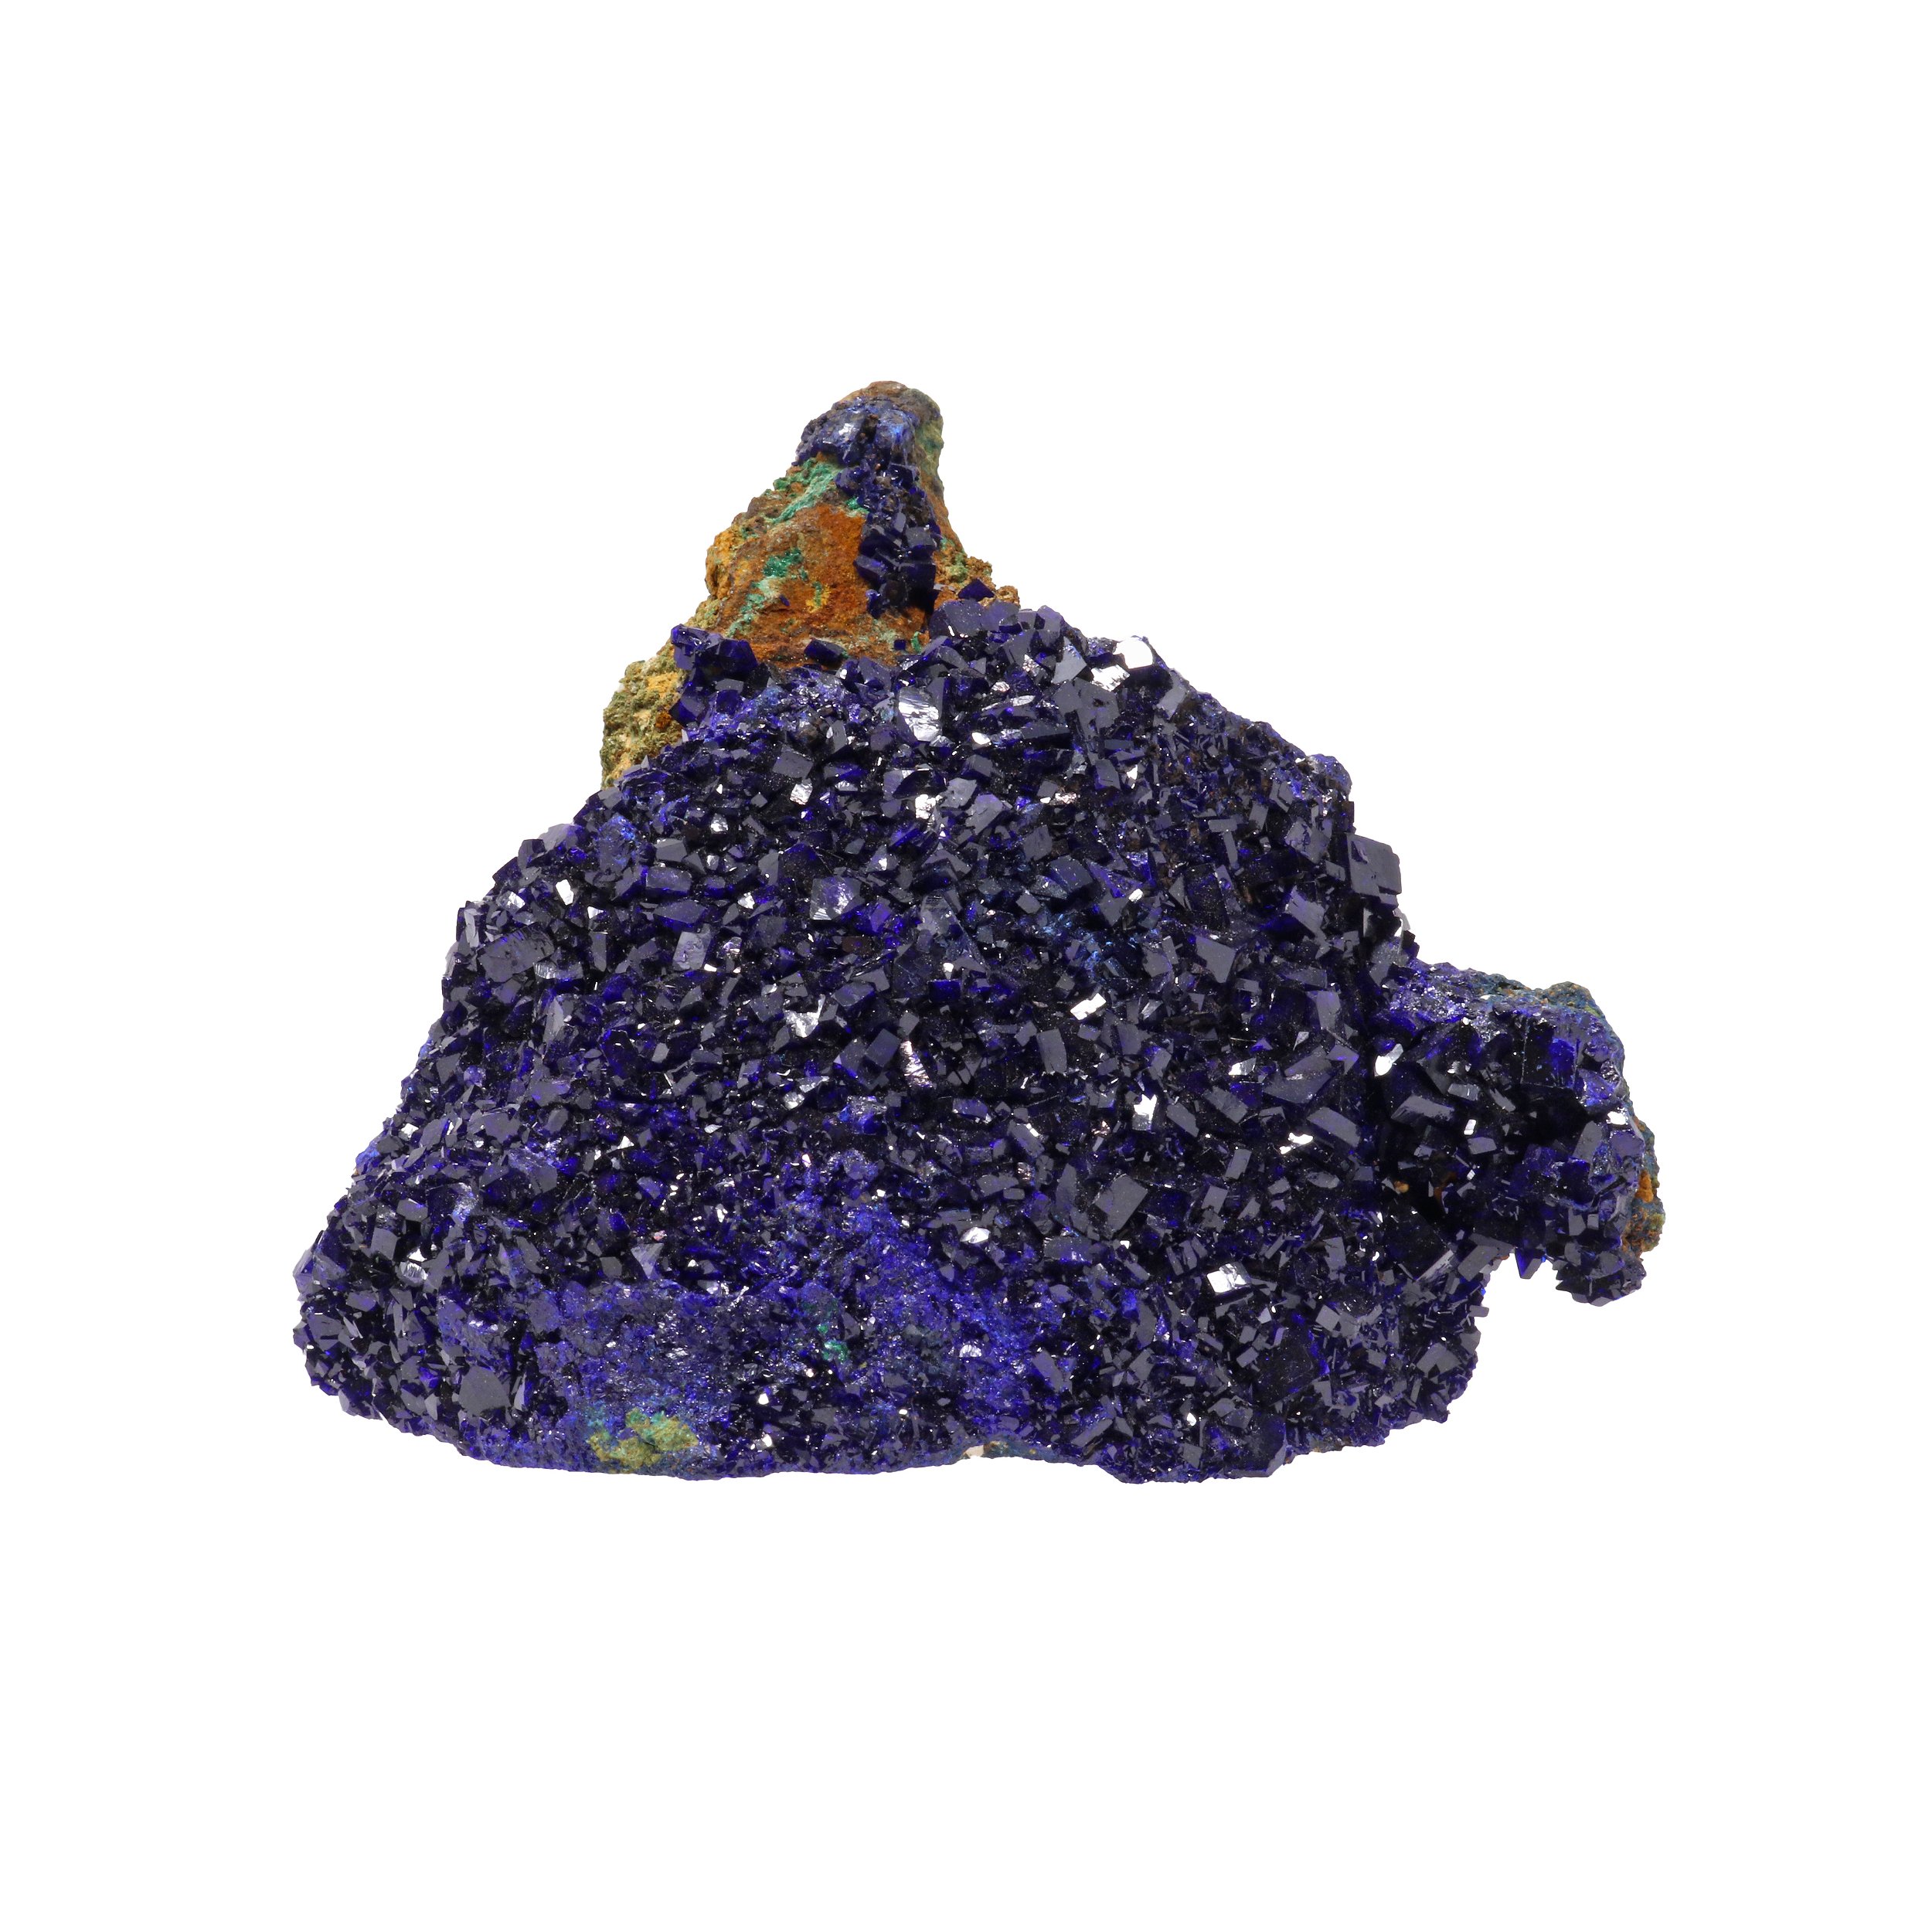 Azurite Specimen On An Acrylic Stand - Large Patch Of Midnight Blue Crystals